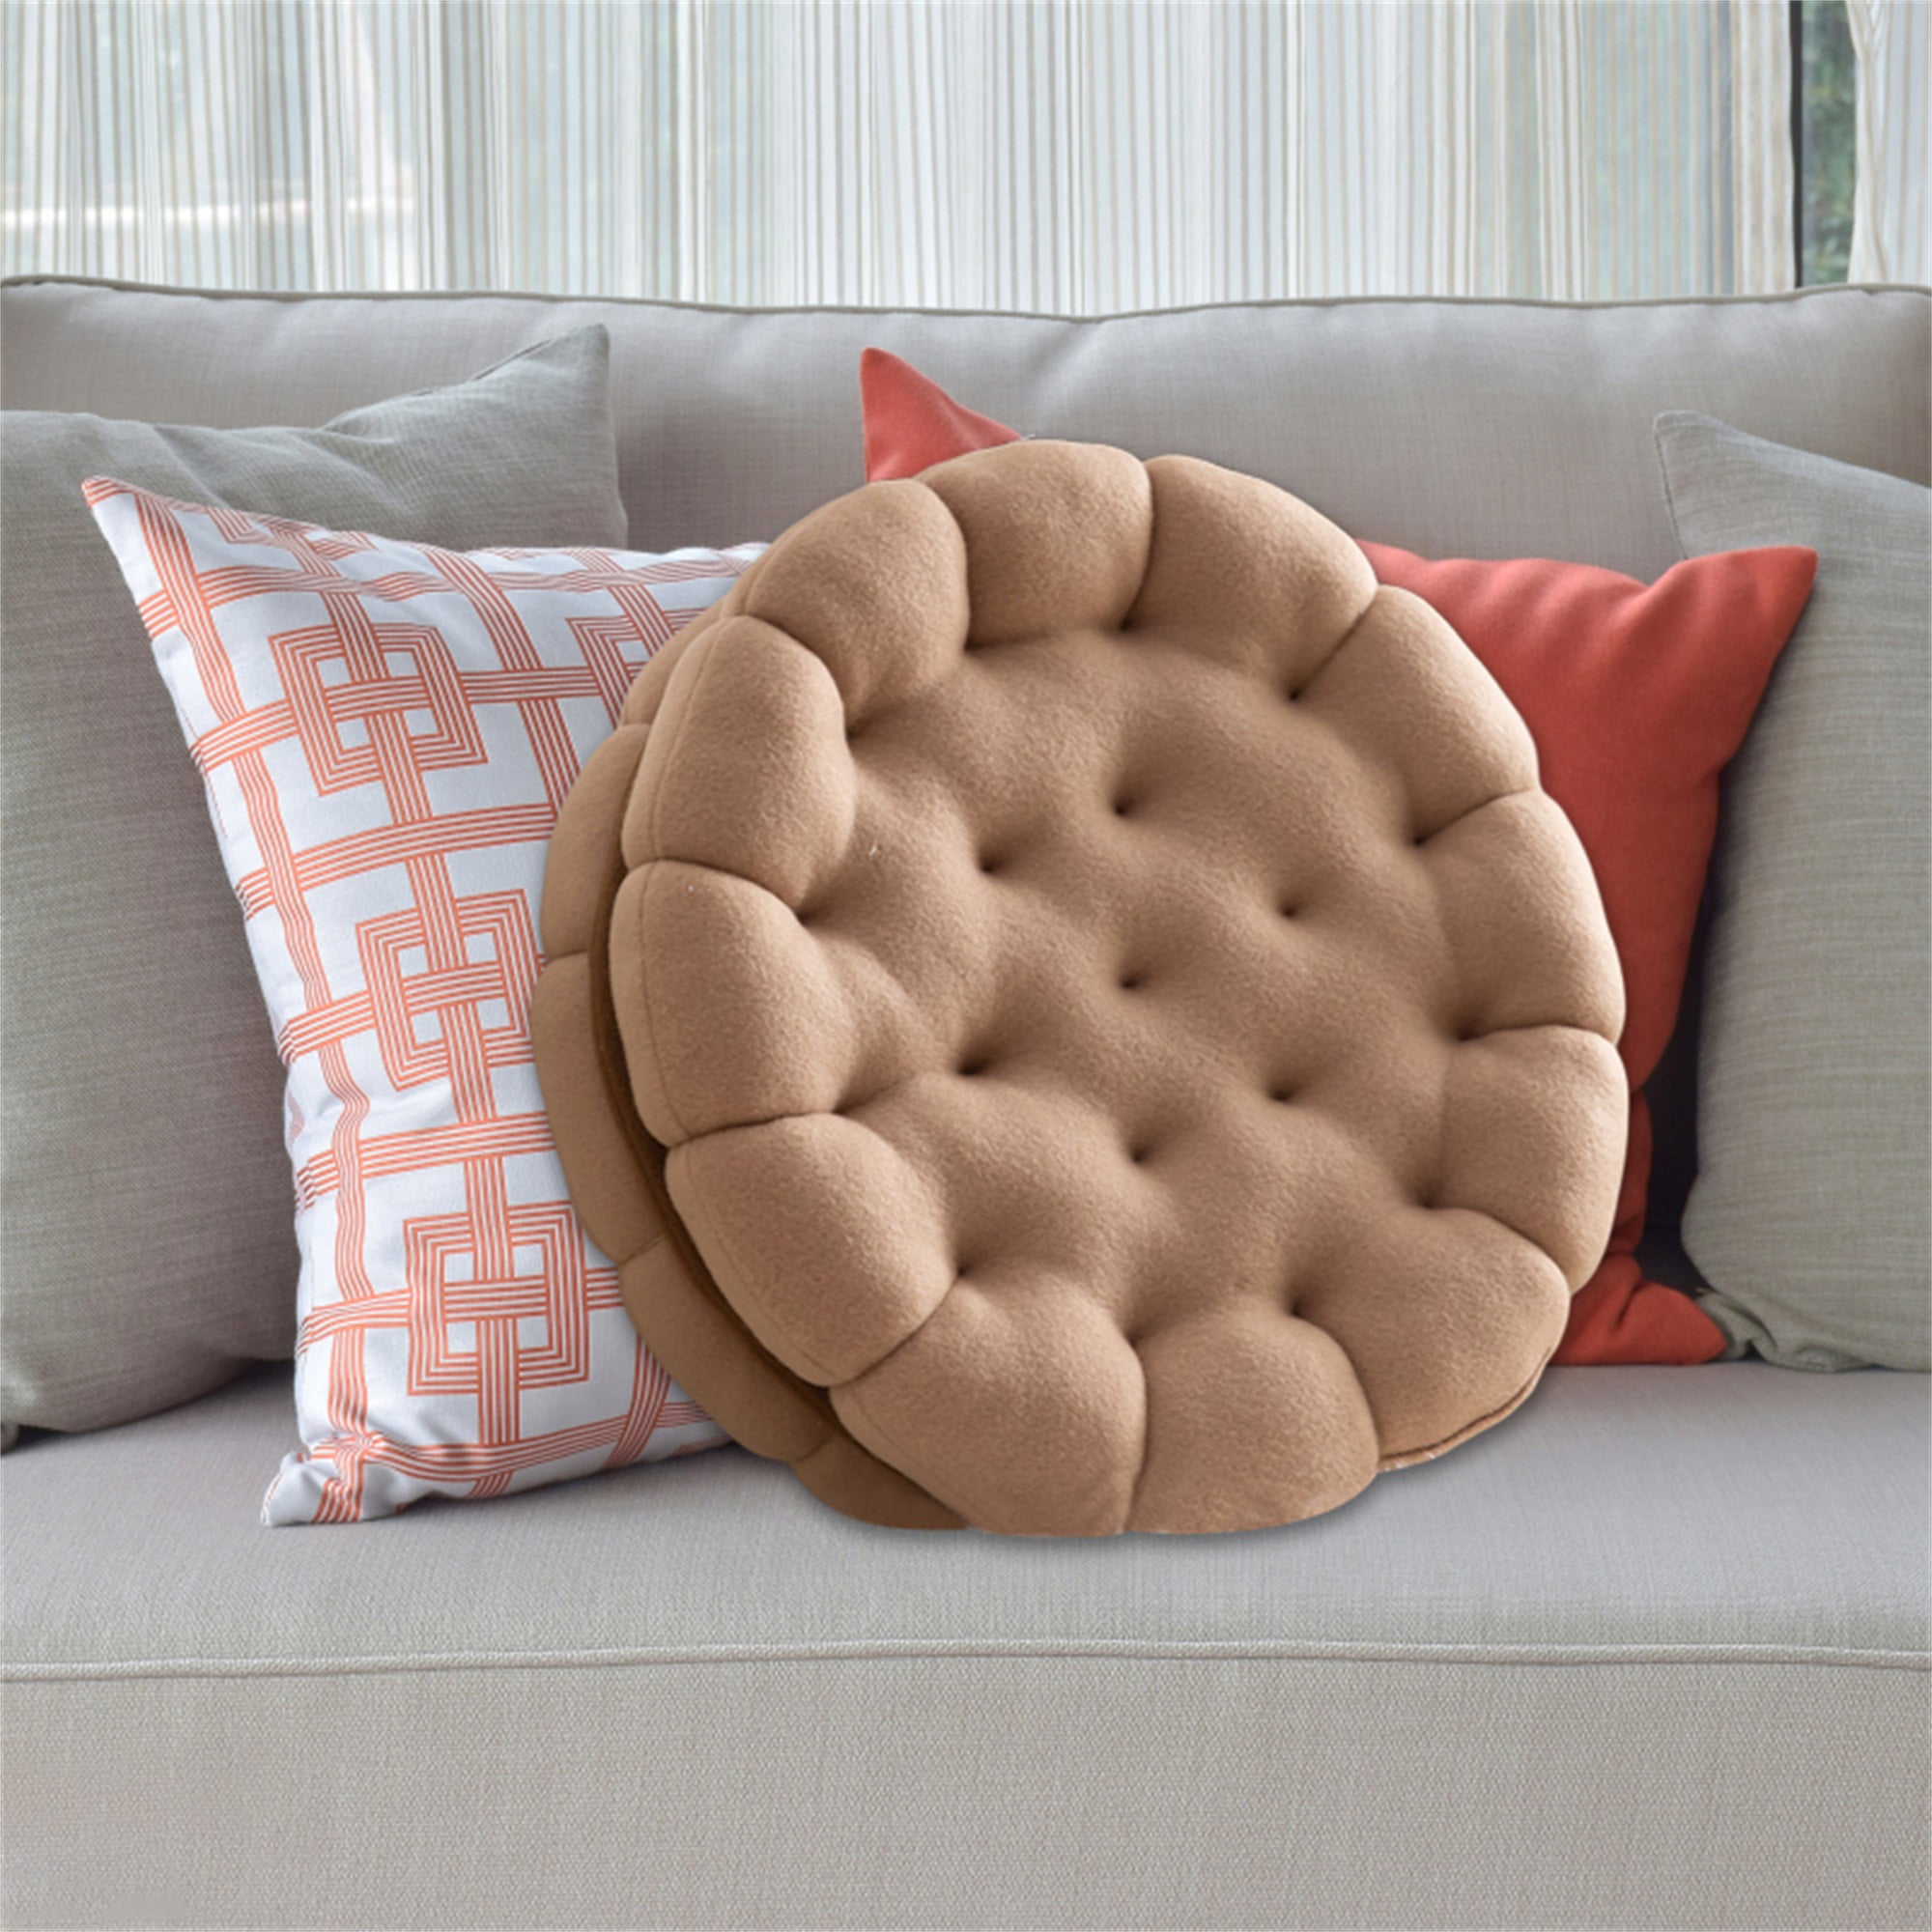 Cute Floor Seating Cushions Biscuit Shaped Decorative Floor Pillow